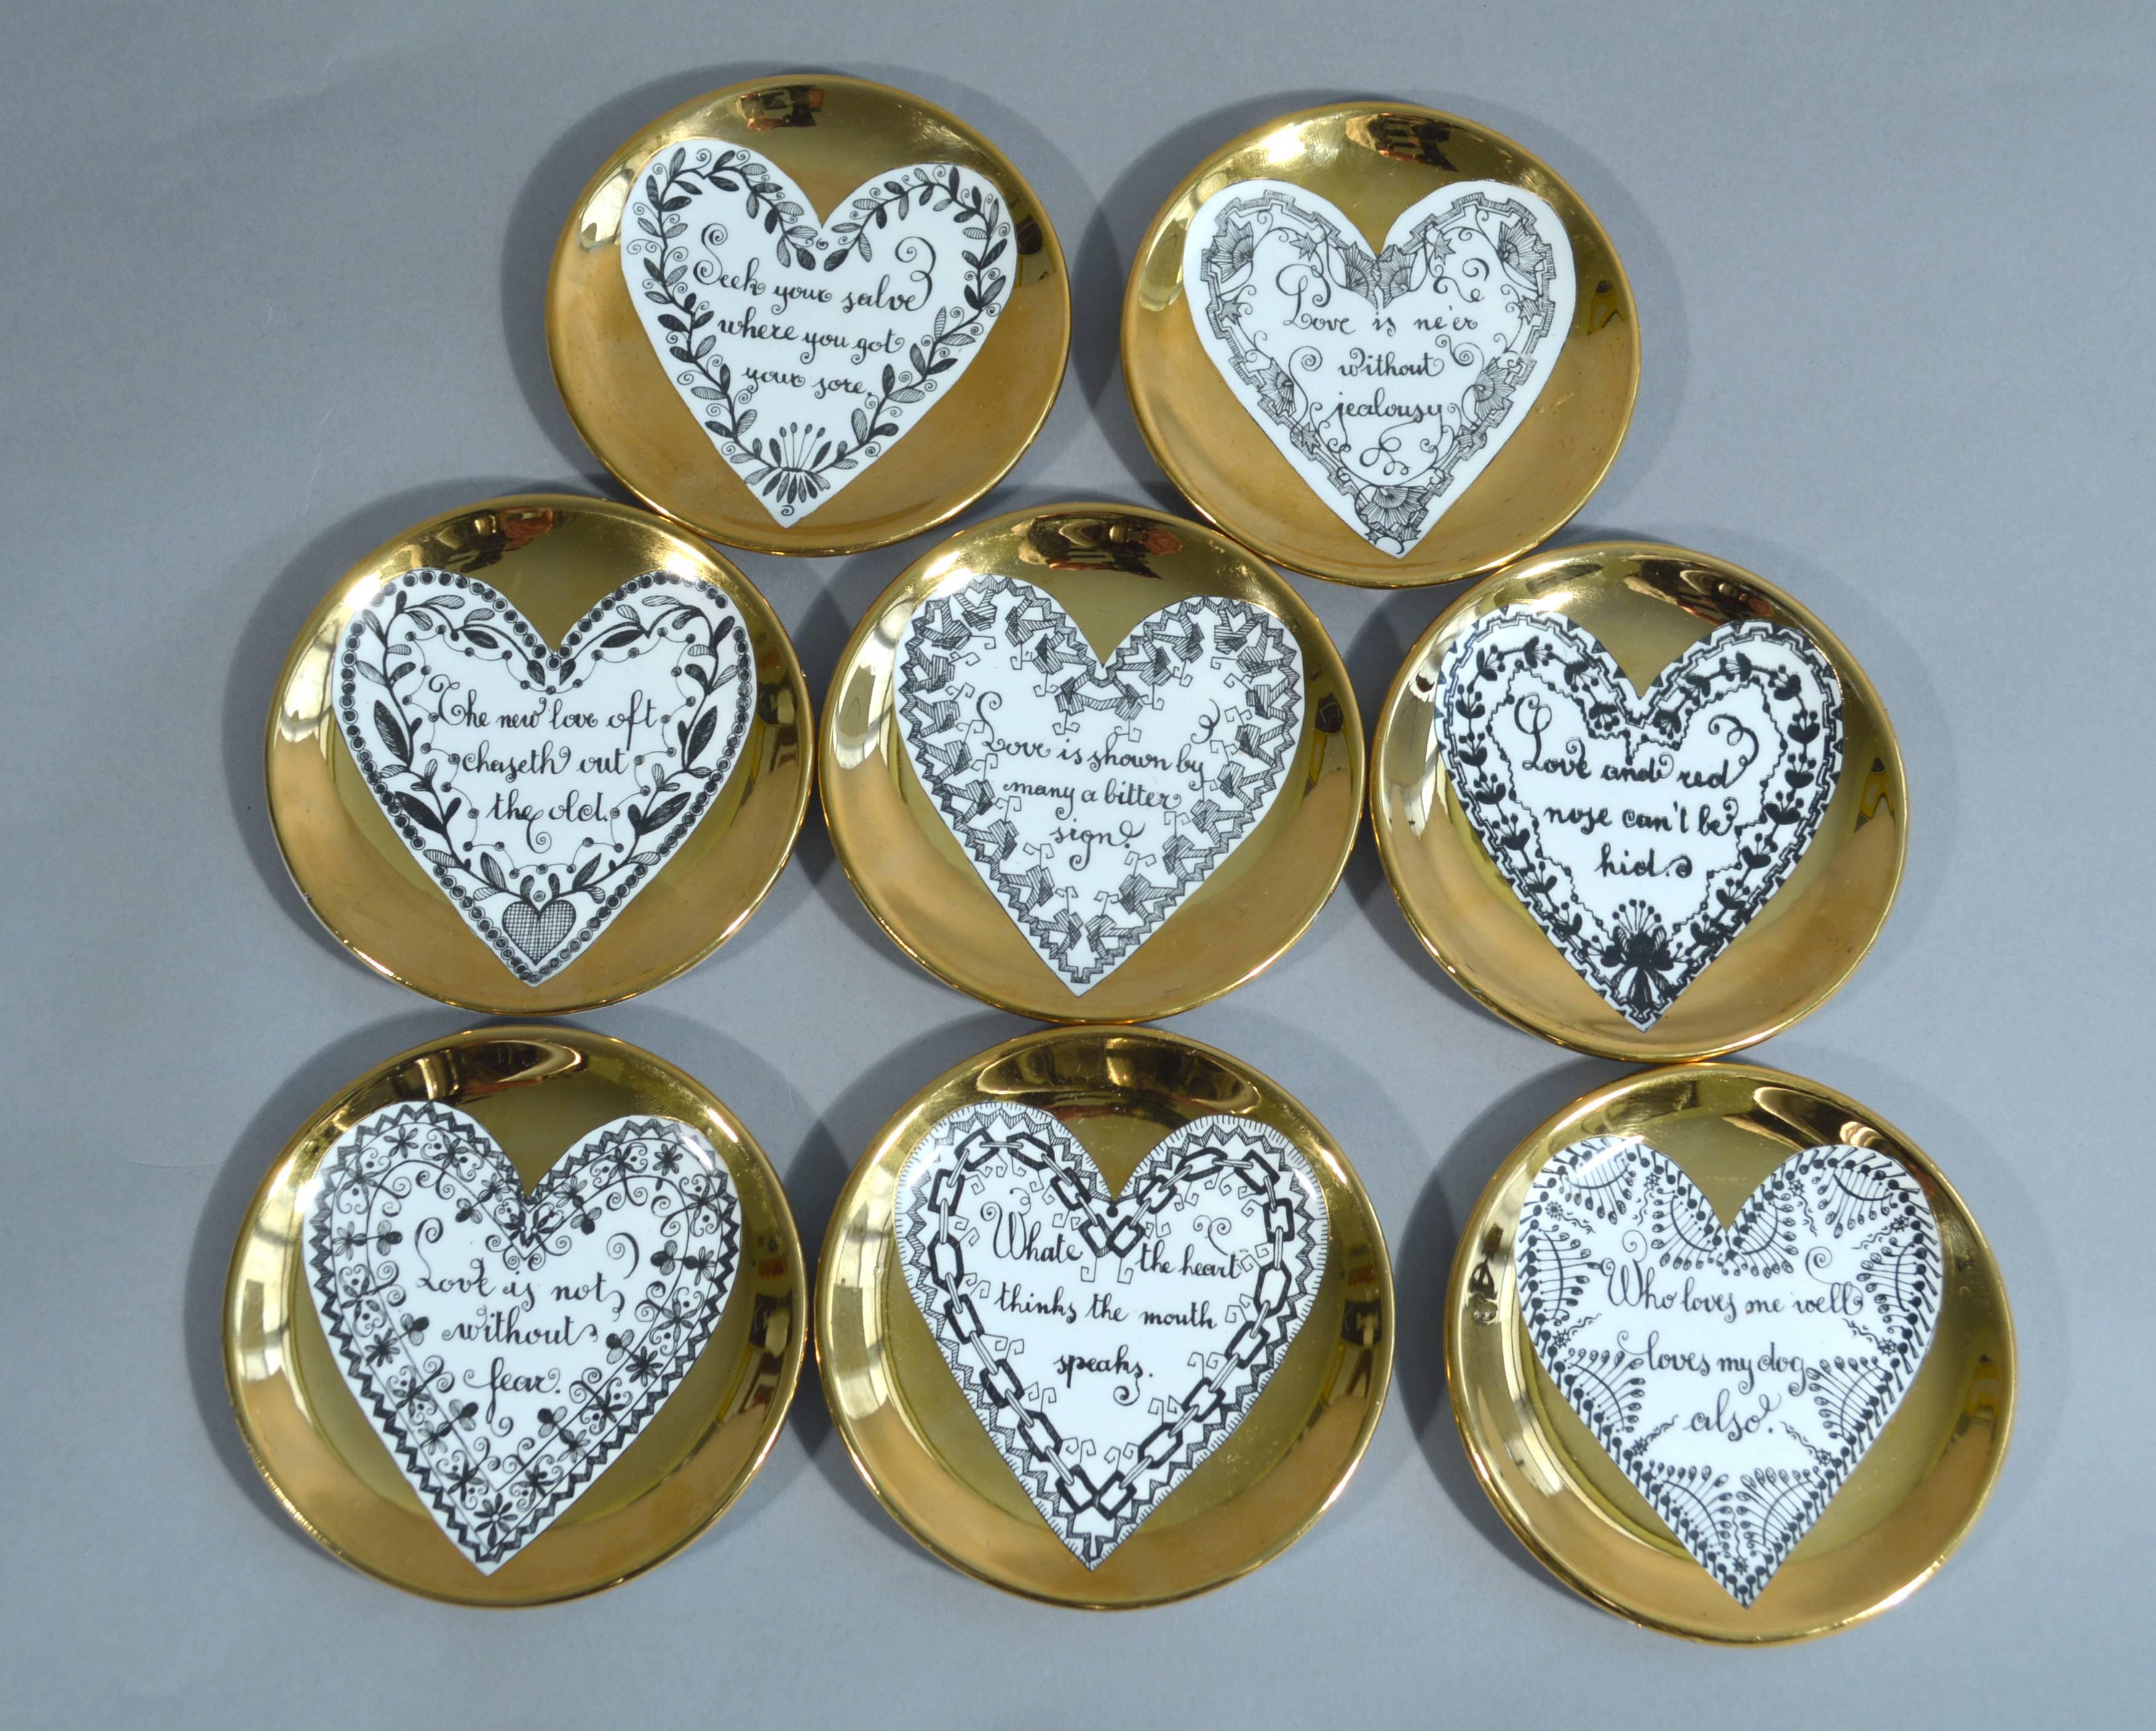 Piero Fornasetti love coasters, 
1960s.

Each coaster has a central white heart on a gold ground. Within each heart is a saying about love framed by a different heart shaped border.

The saying or proverbs read as follows

Love is not without